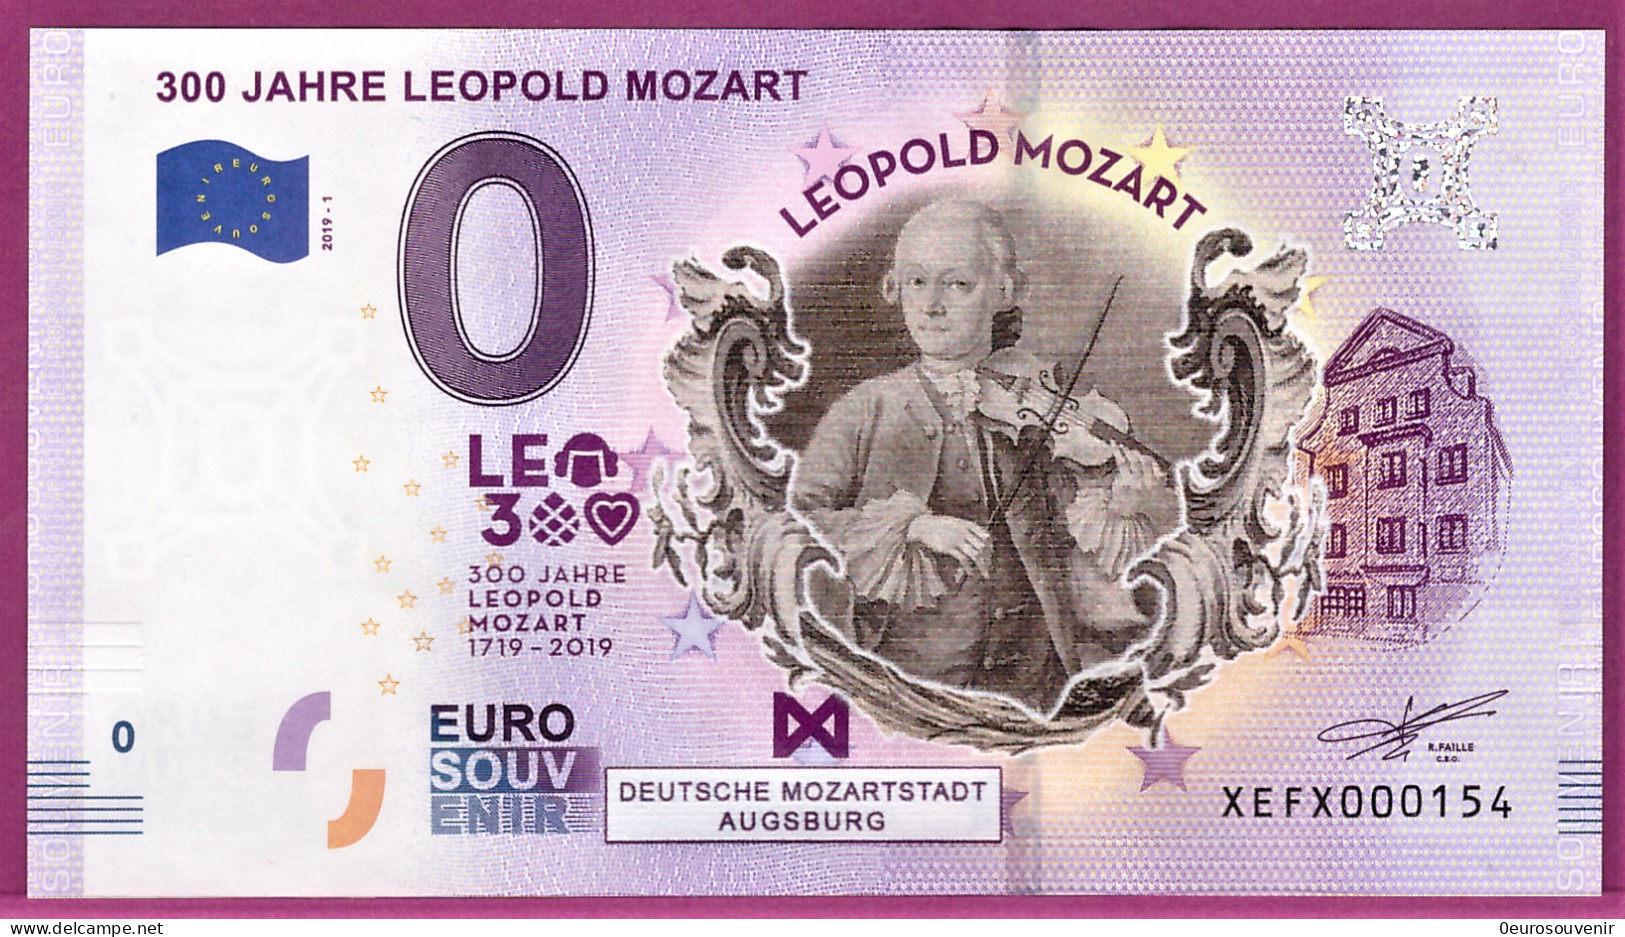 0-Euro XEFX 2019-1 Color 300 JAHRE LEOPOLD MOZART FARBDRUCK - Private Proofs / Unofficial